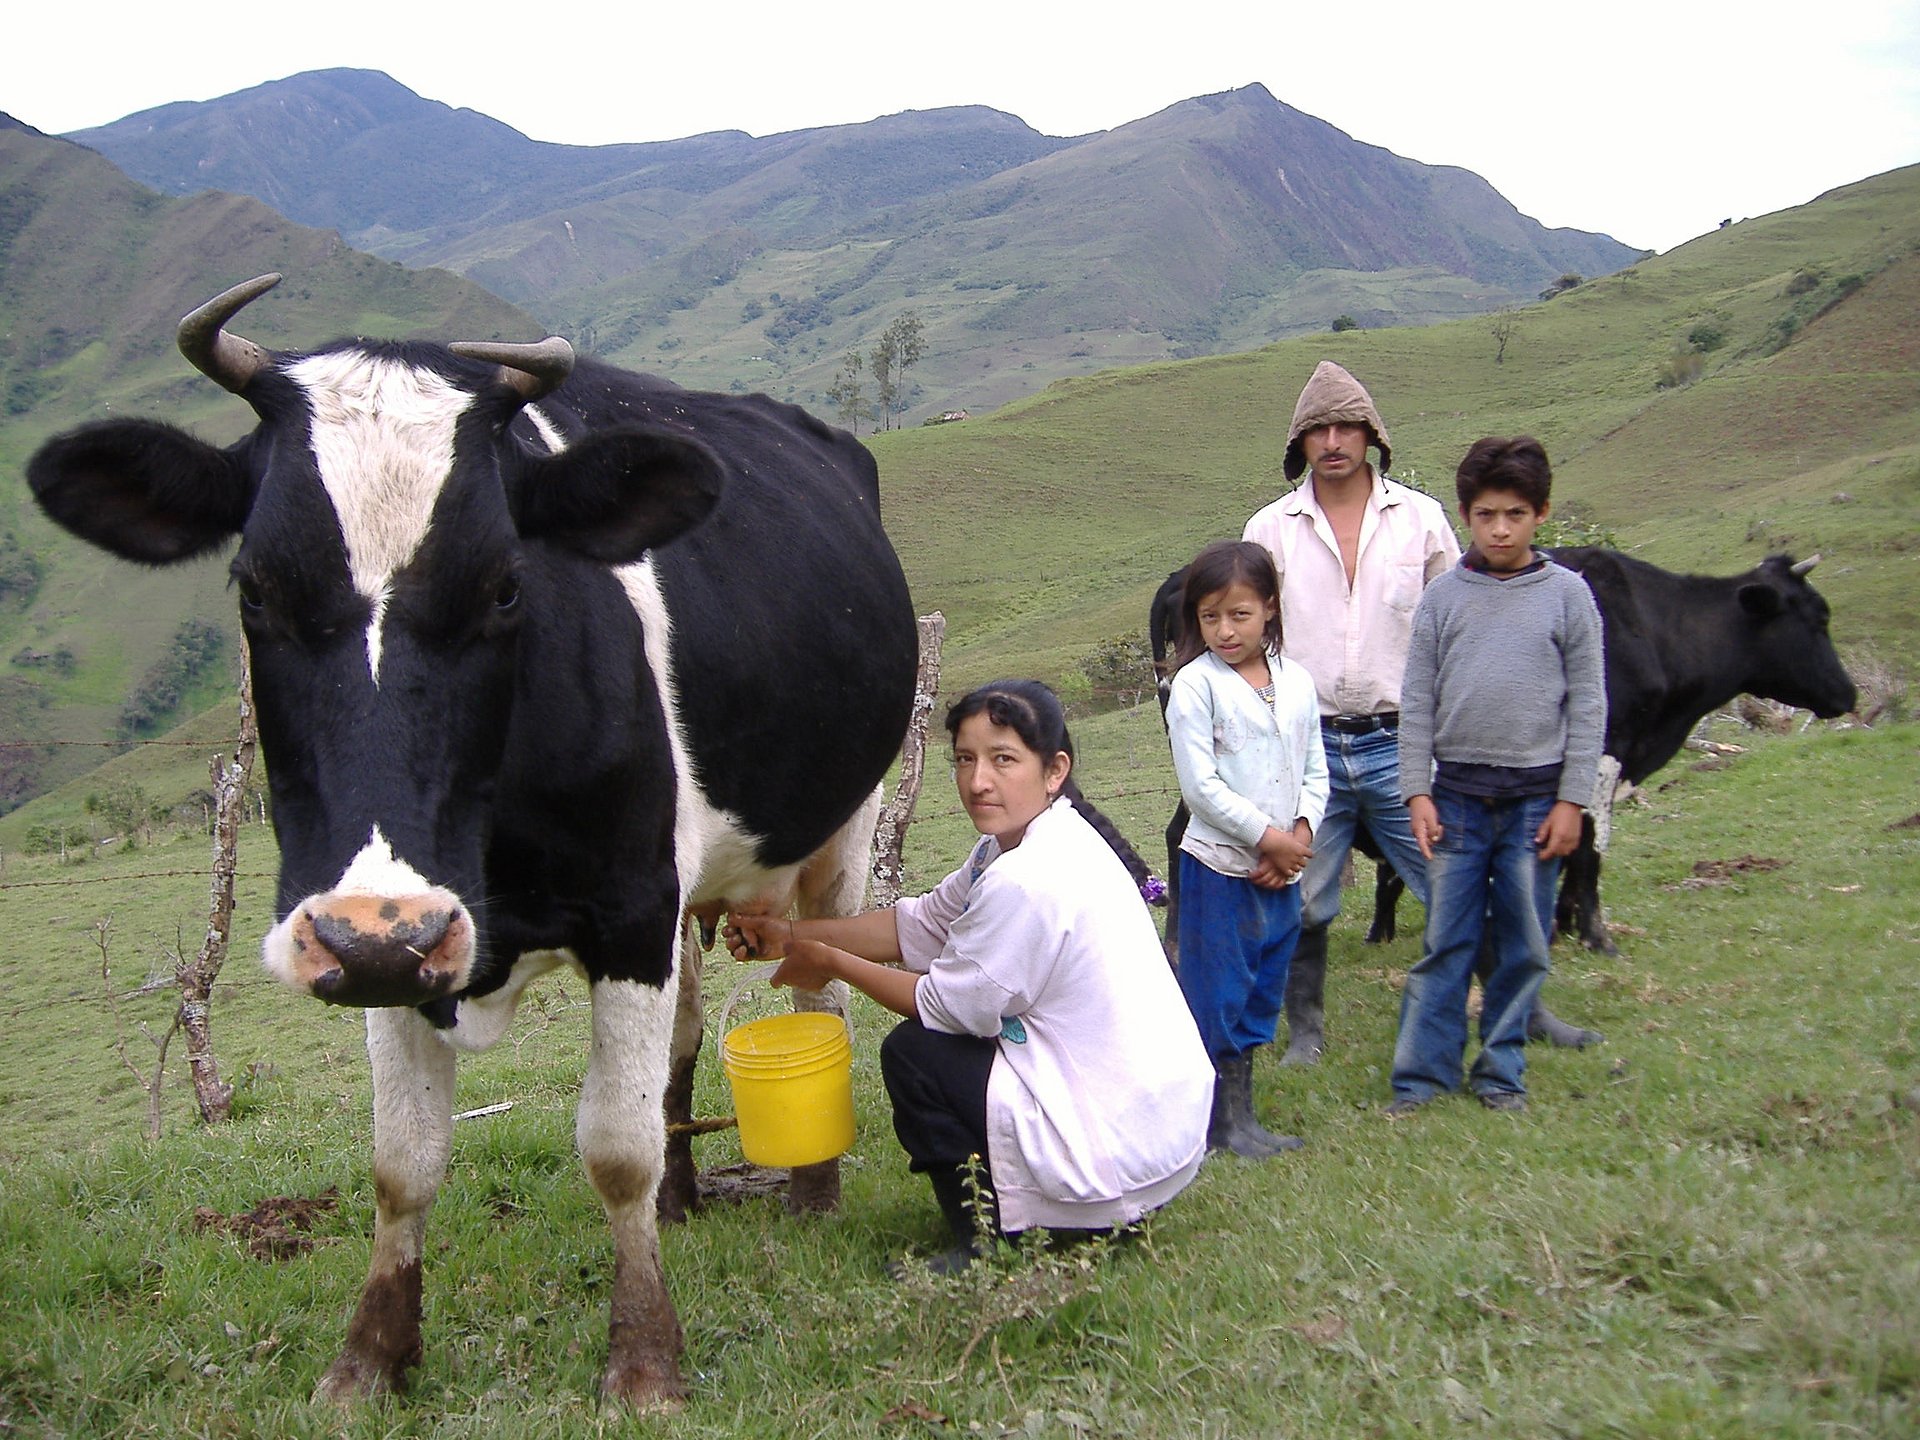 Most of the cleared land is used as pasture as is the case here in the valley of Los Gabos in Ecuador.